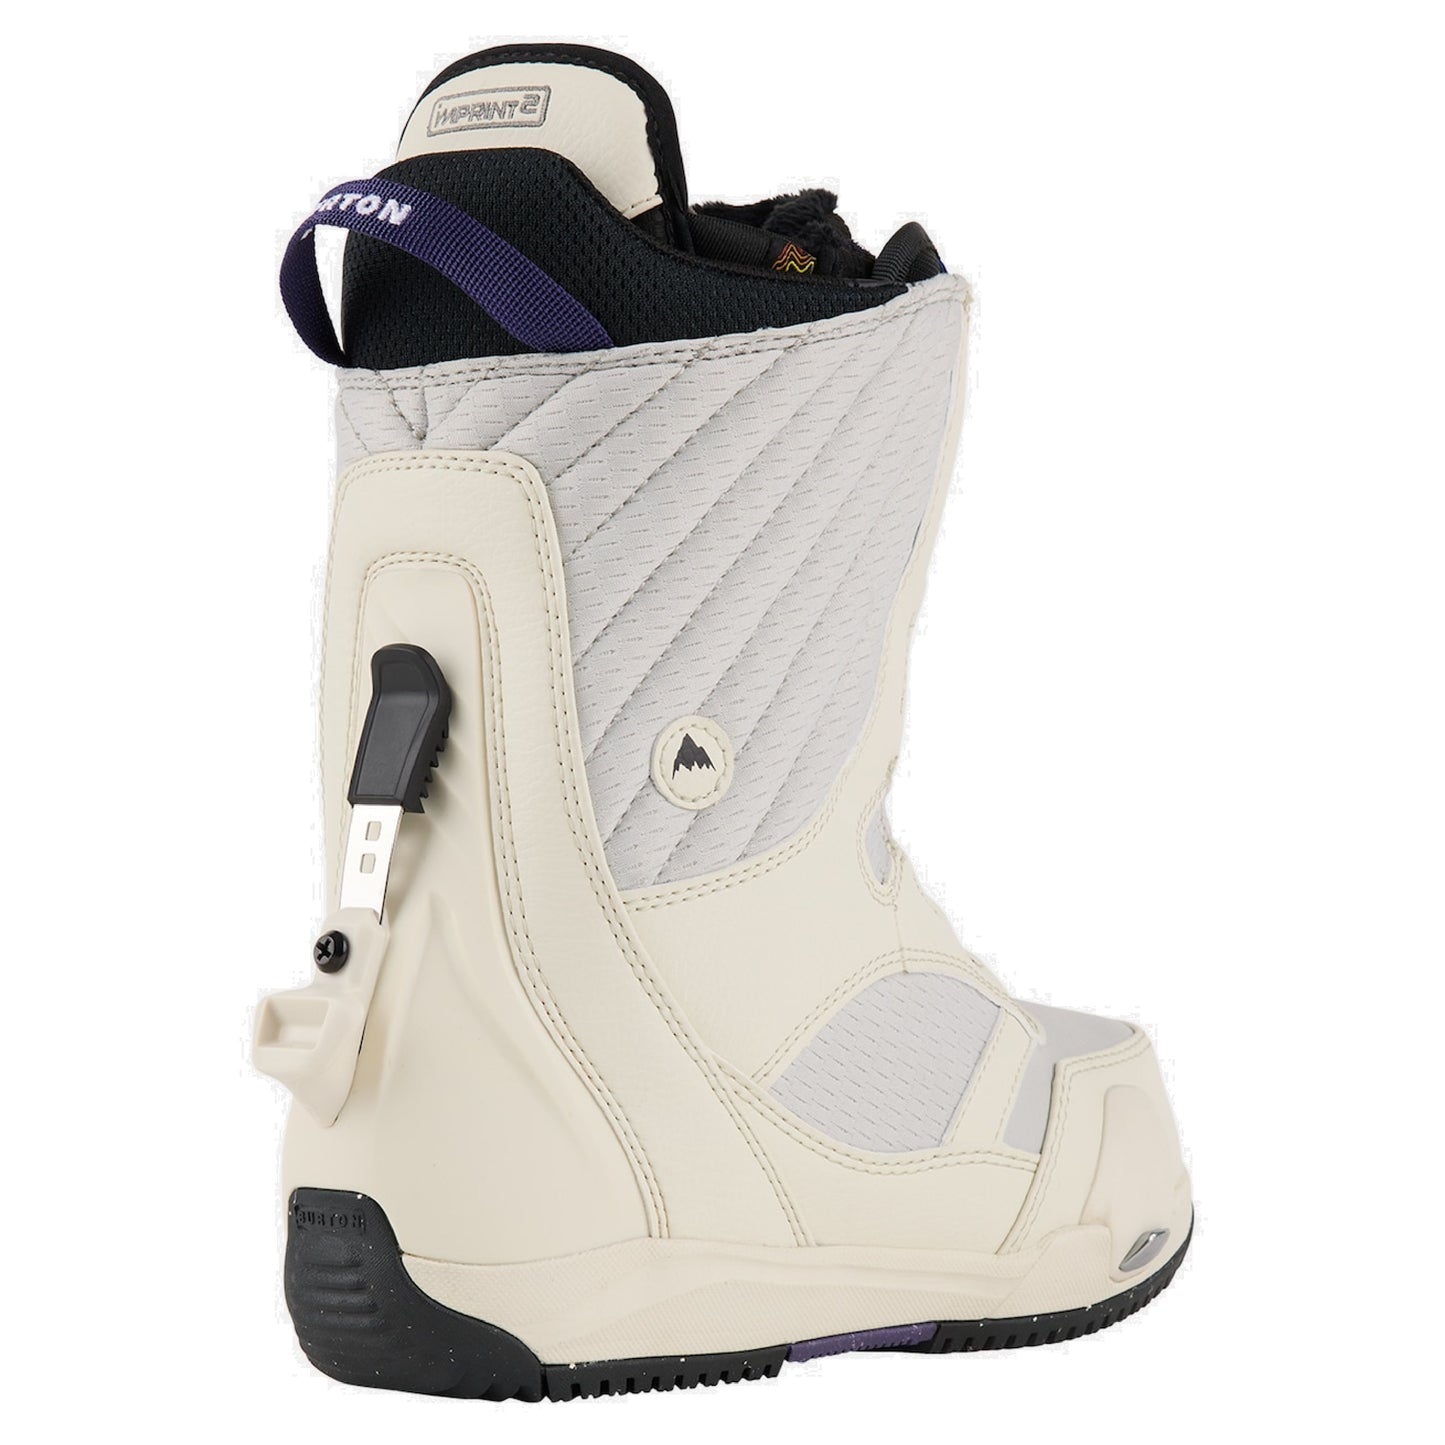 Women's Burton Limelight Step On Snowboard Boots Stout White Snowboard Boots